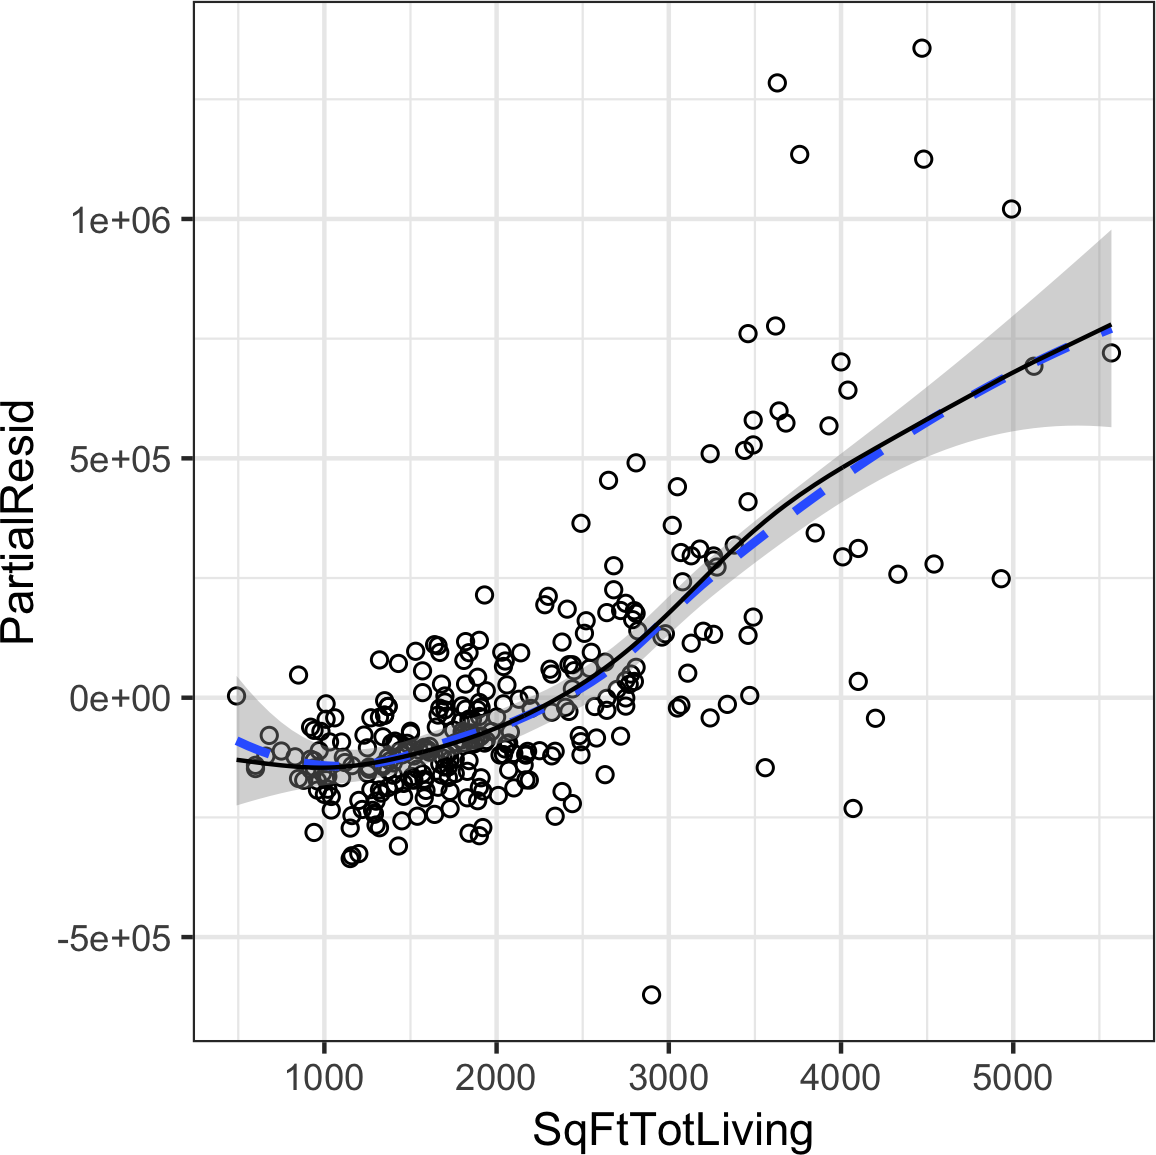 A GAM regression fit for the variable SqFtTotLiving (solid line) compared to a smooth (dashed line)